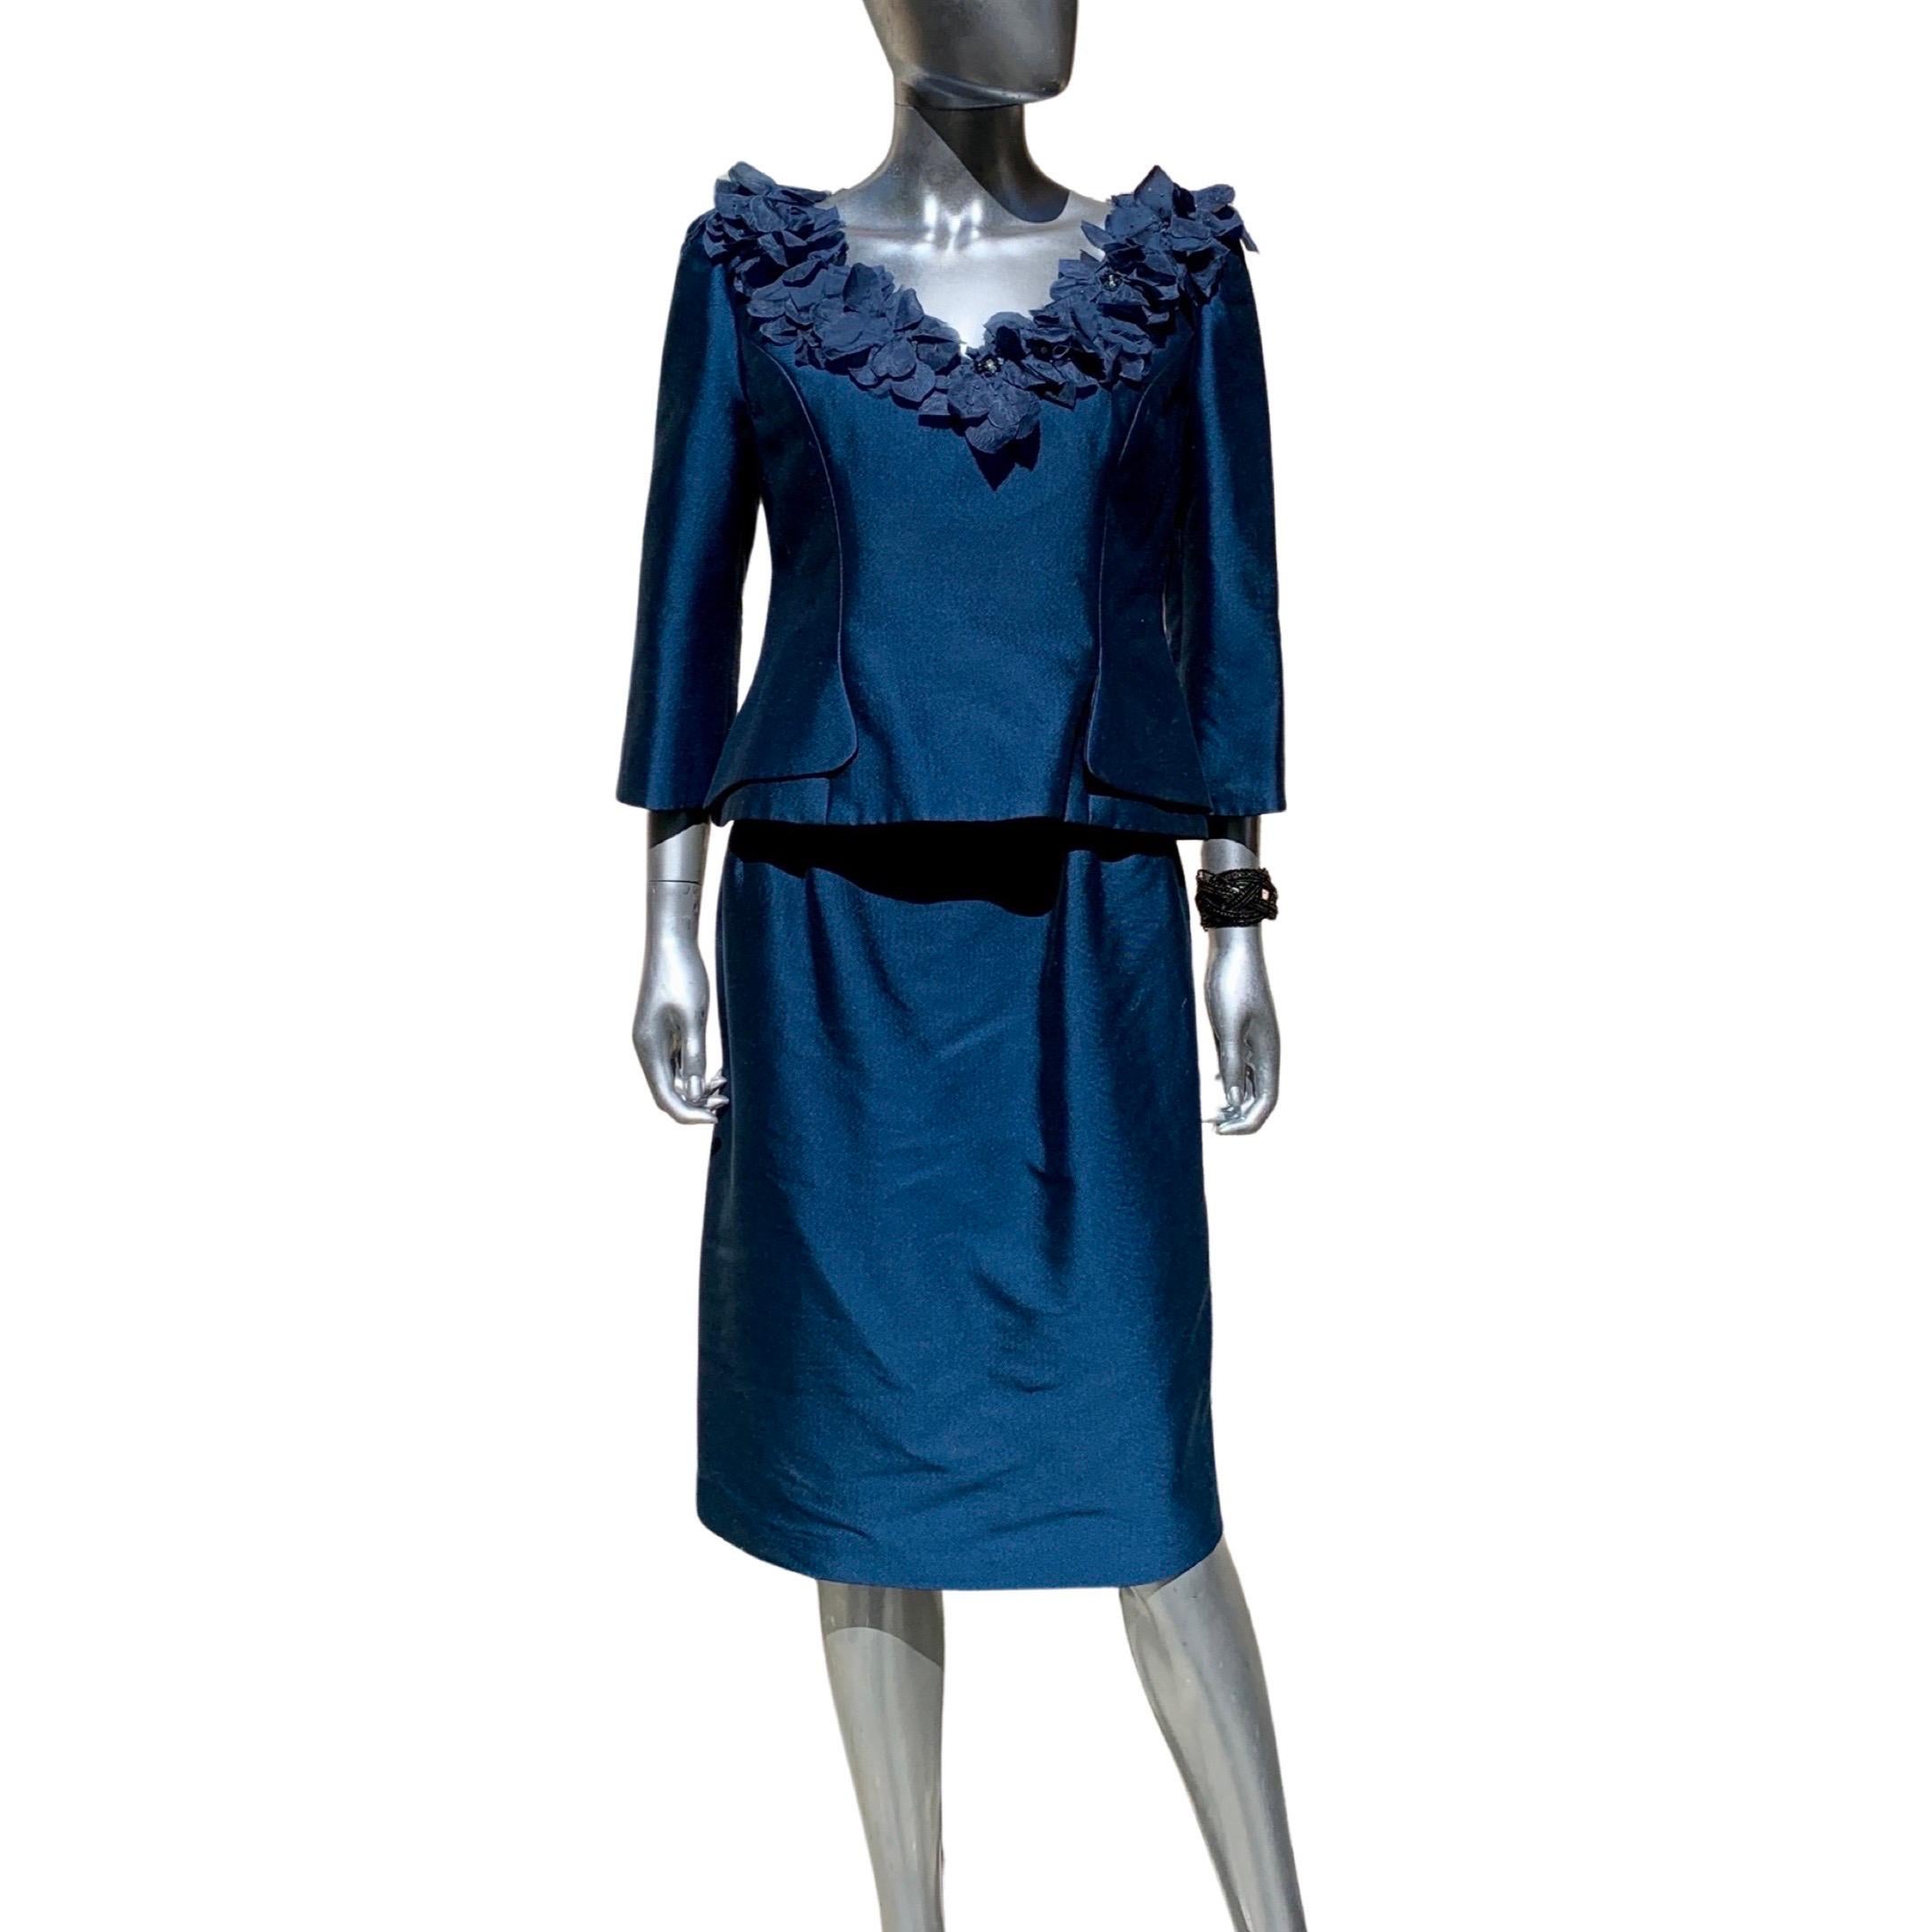 Three Piece Saphire Blue Couture Evening Ensemble by Lily Samii SF Size 8 In Good Condition For Sale In Palm Springs, CA